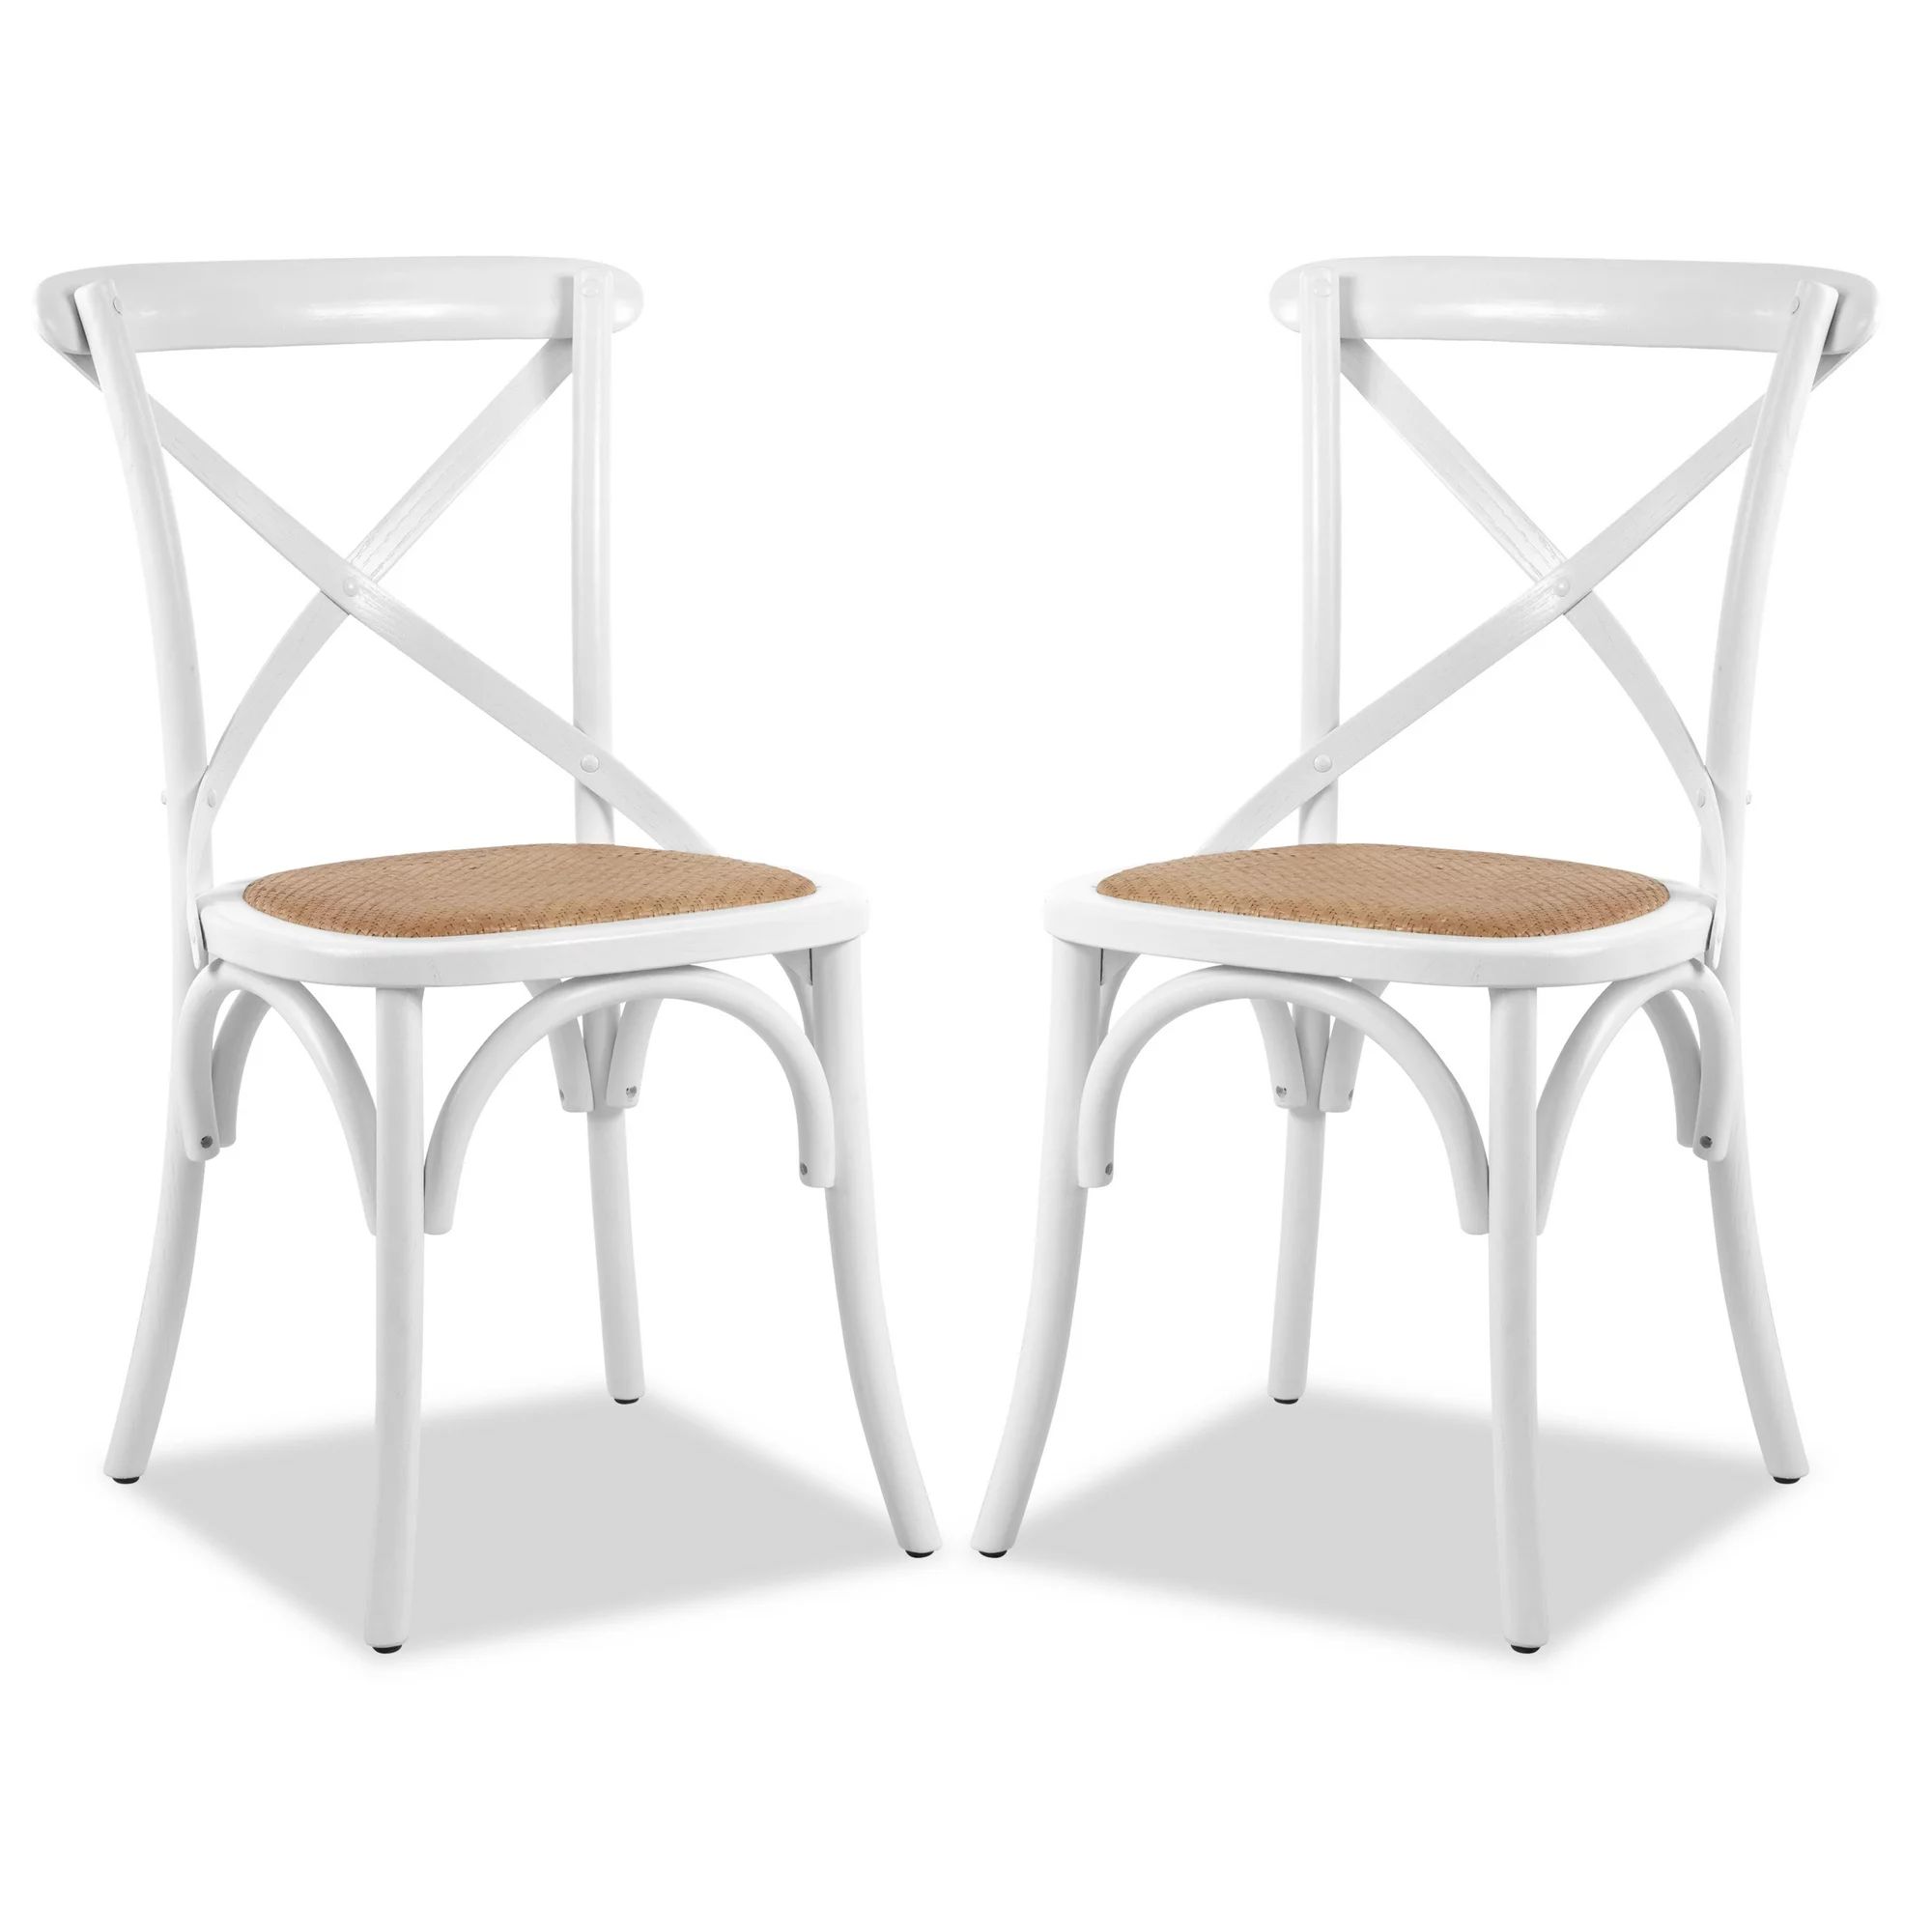 Poly & Bark Cafton Crossback Chair in White (Set of 2) | Walmart (US)